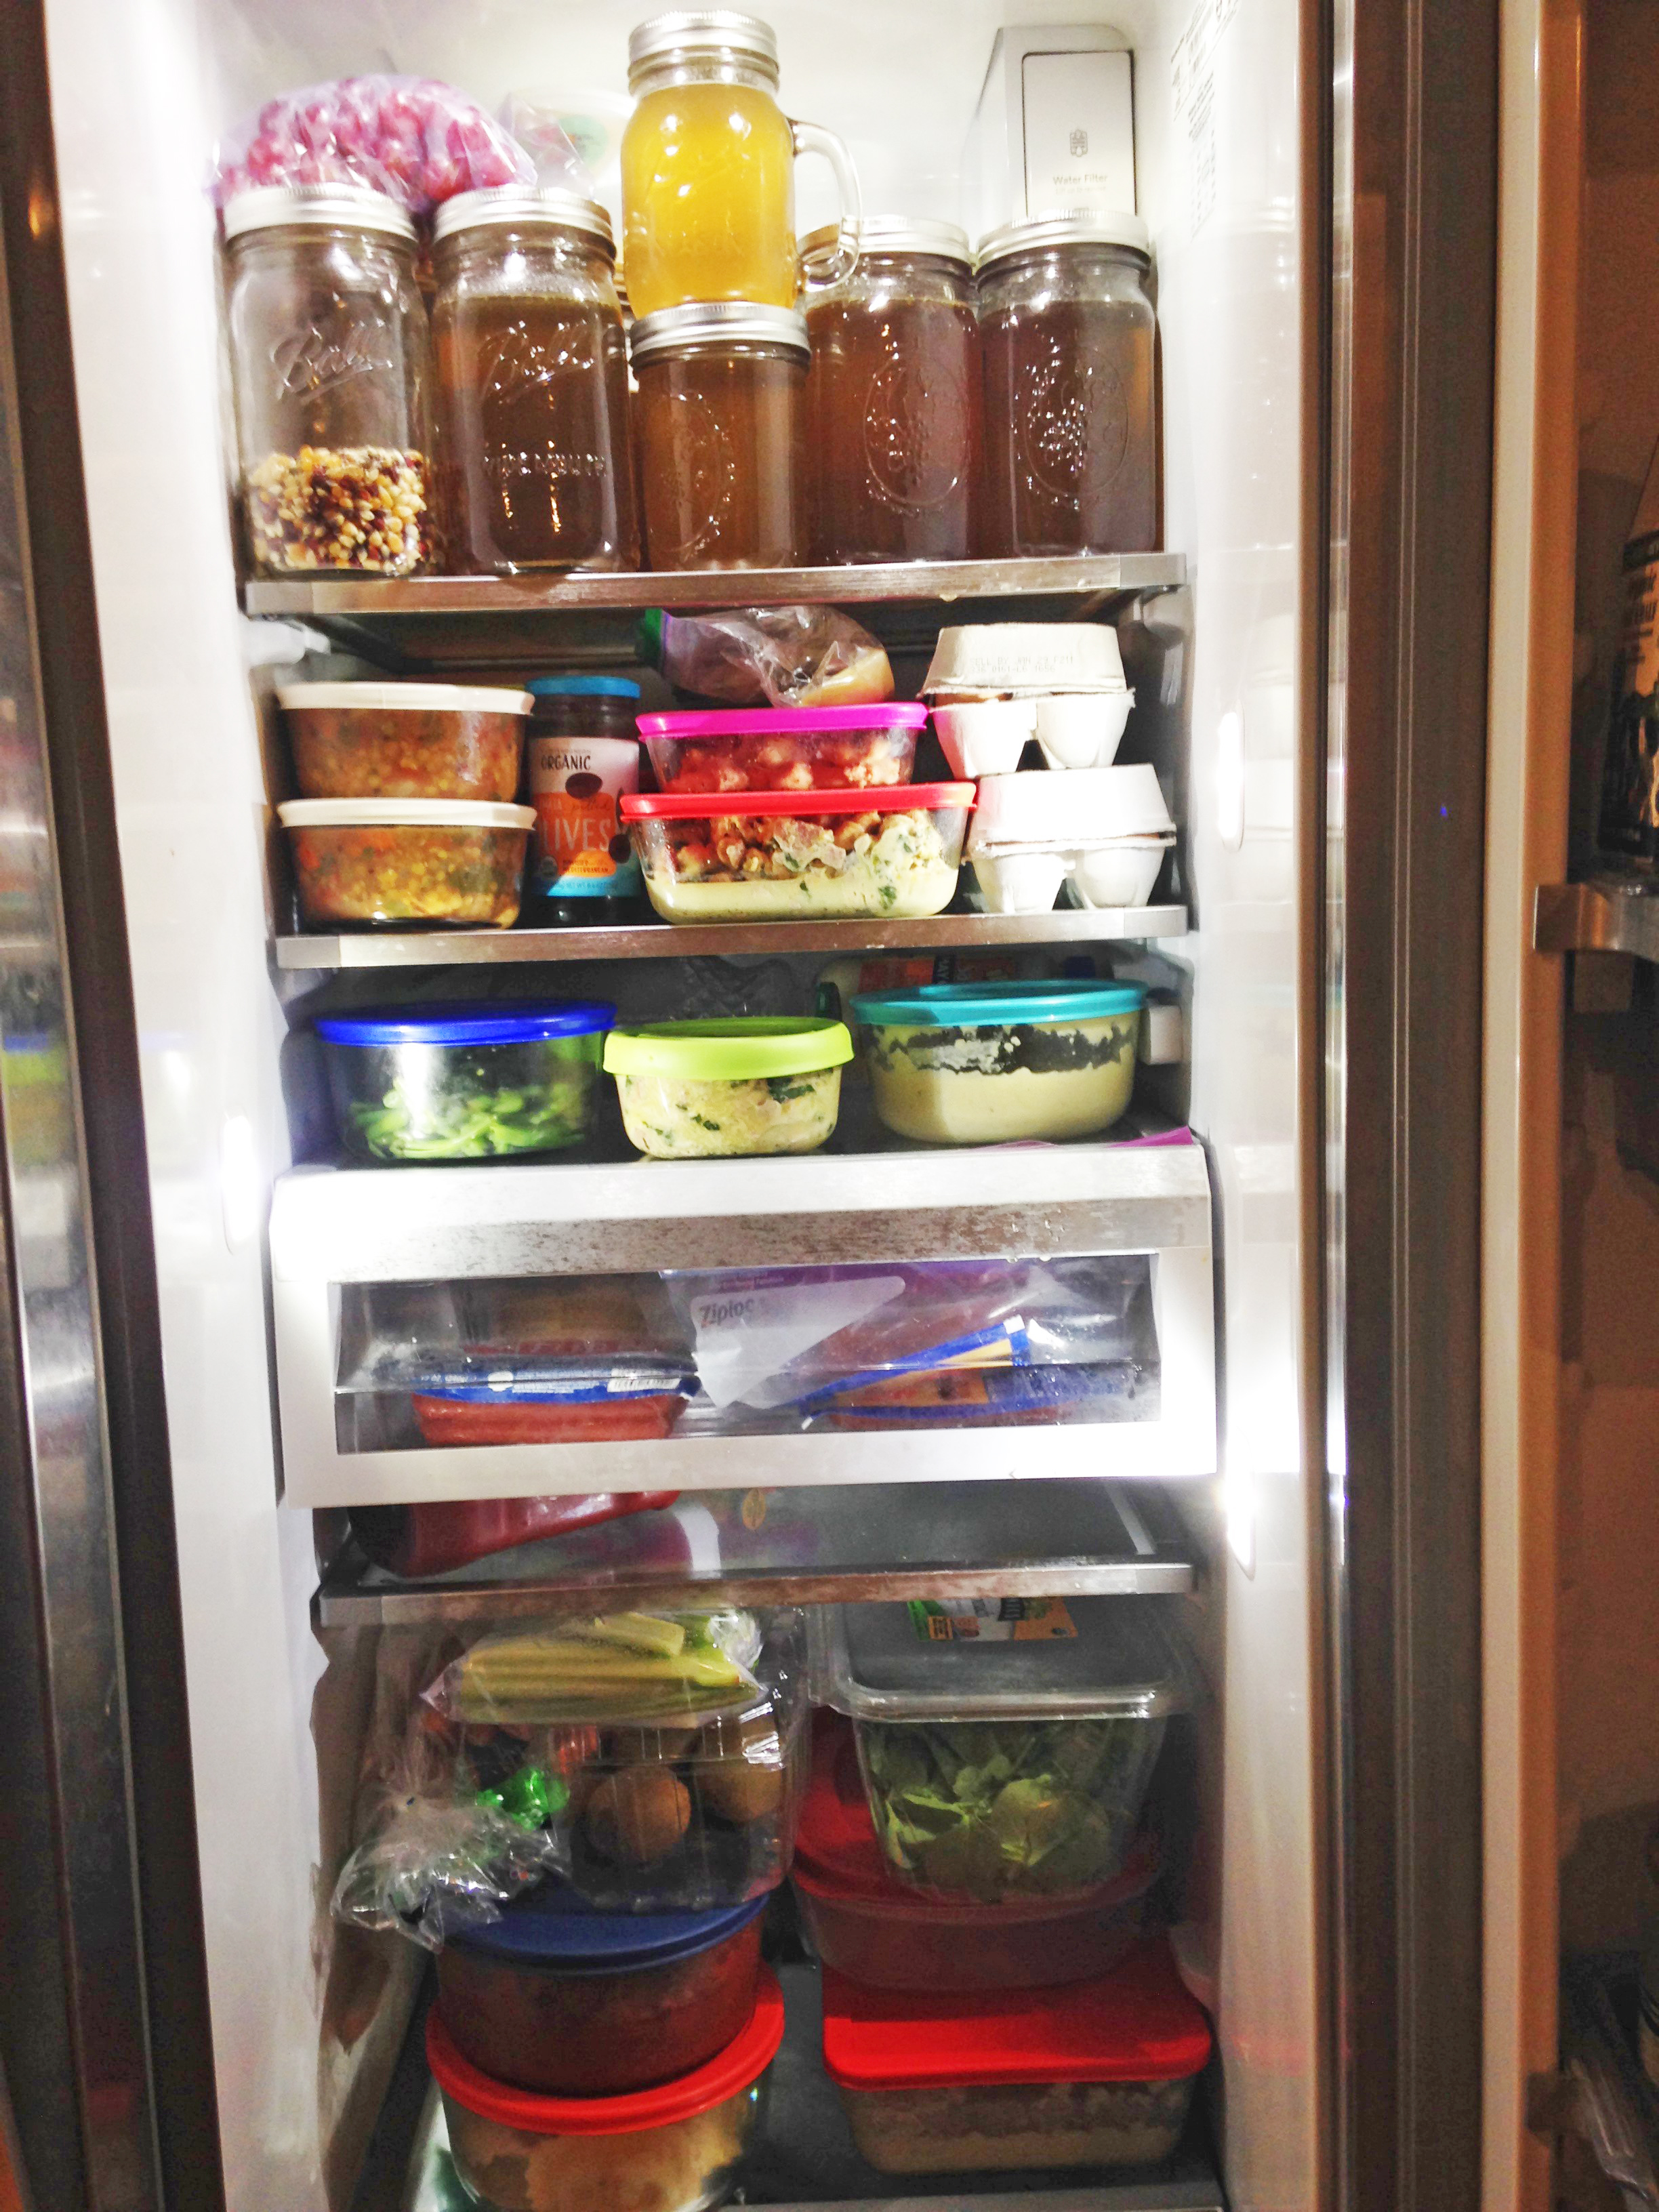 What Does a Clinician's Fridge Look Like Inside? - Well of Life Center